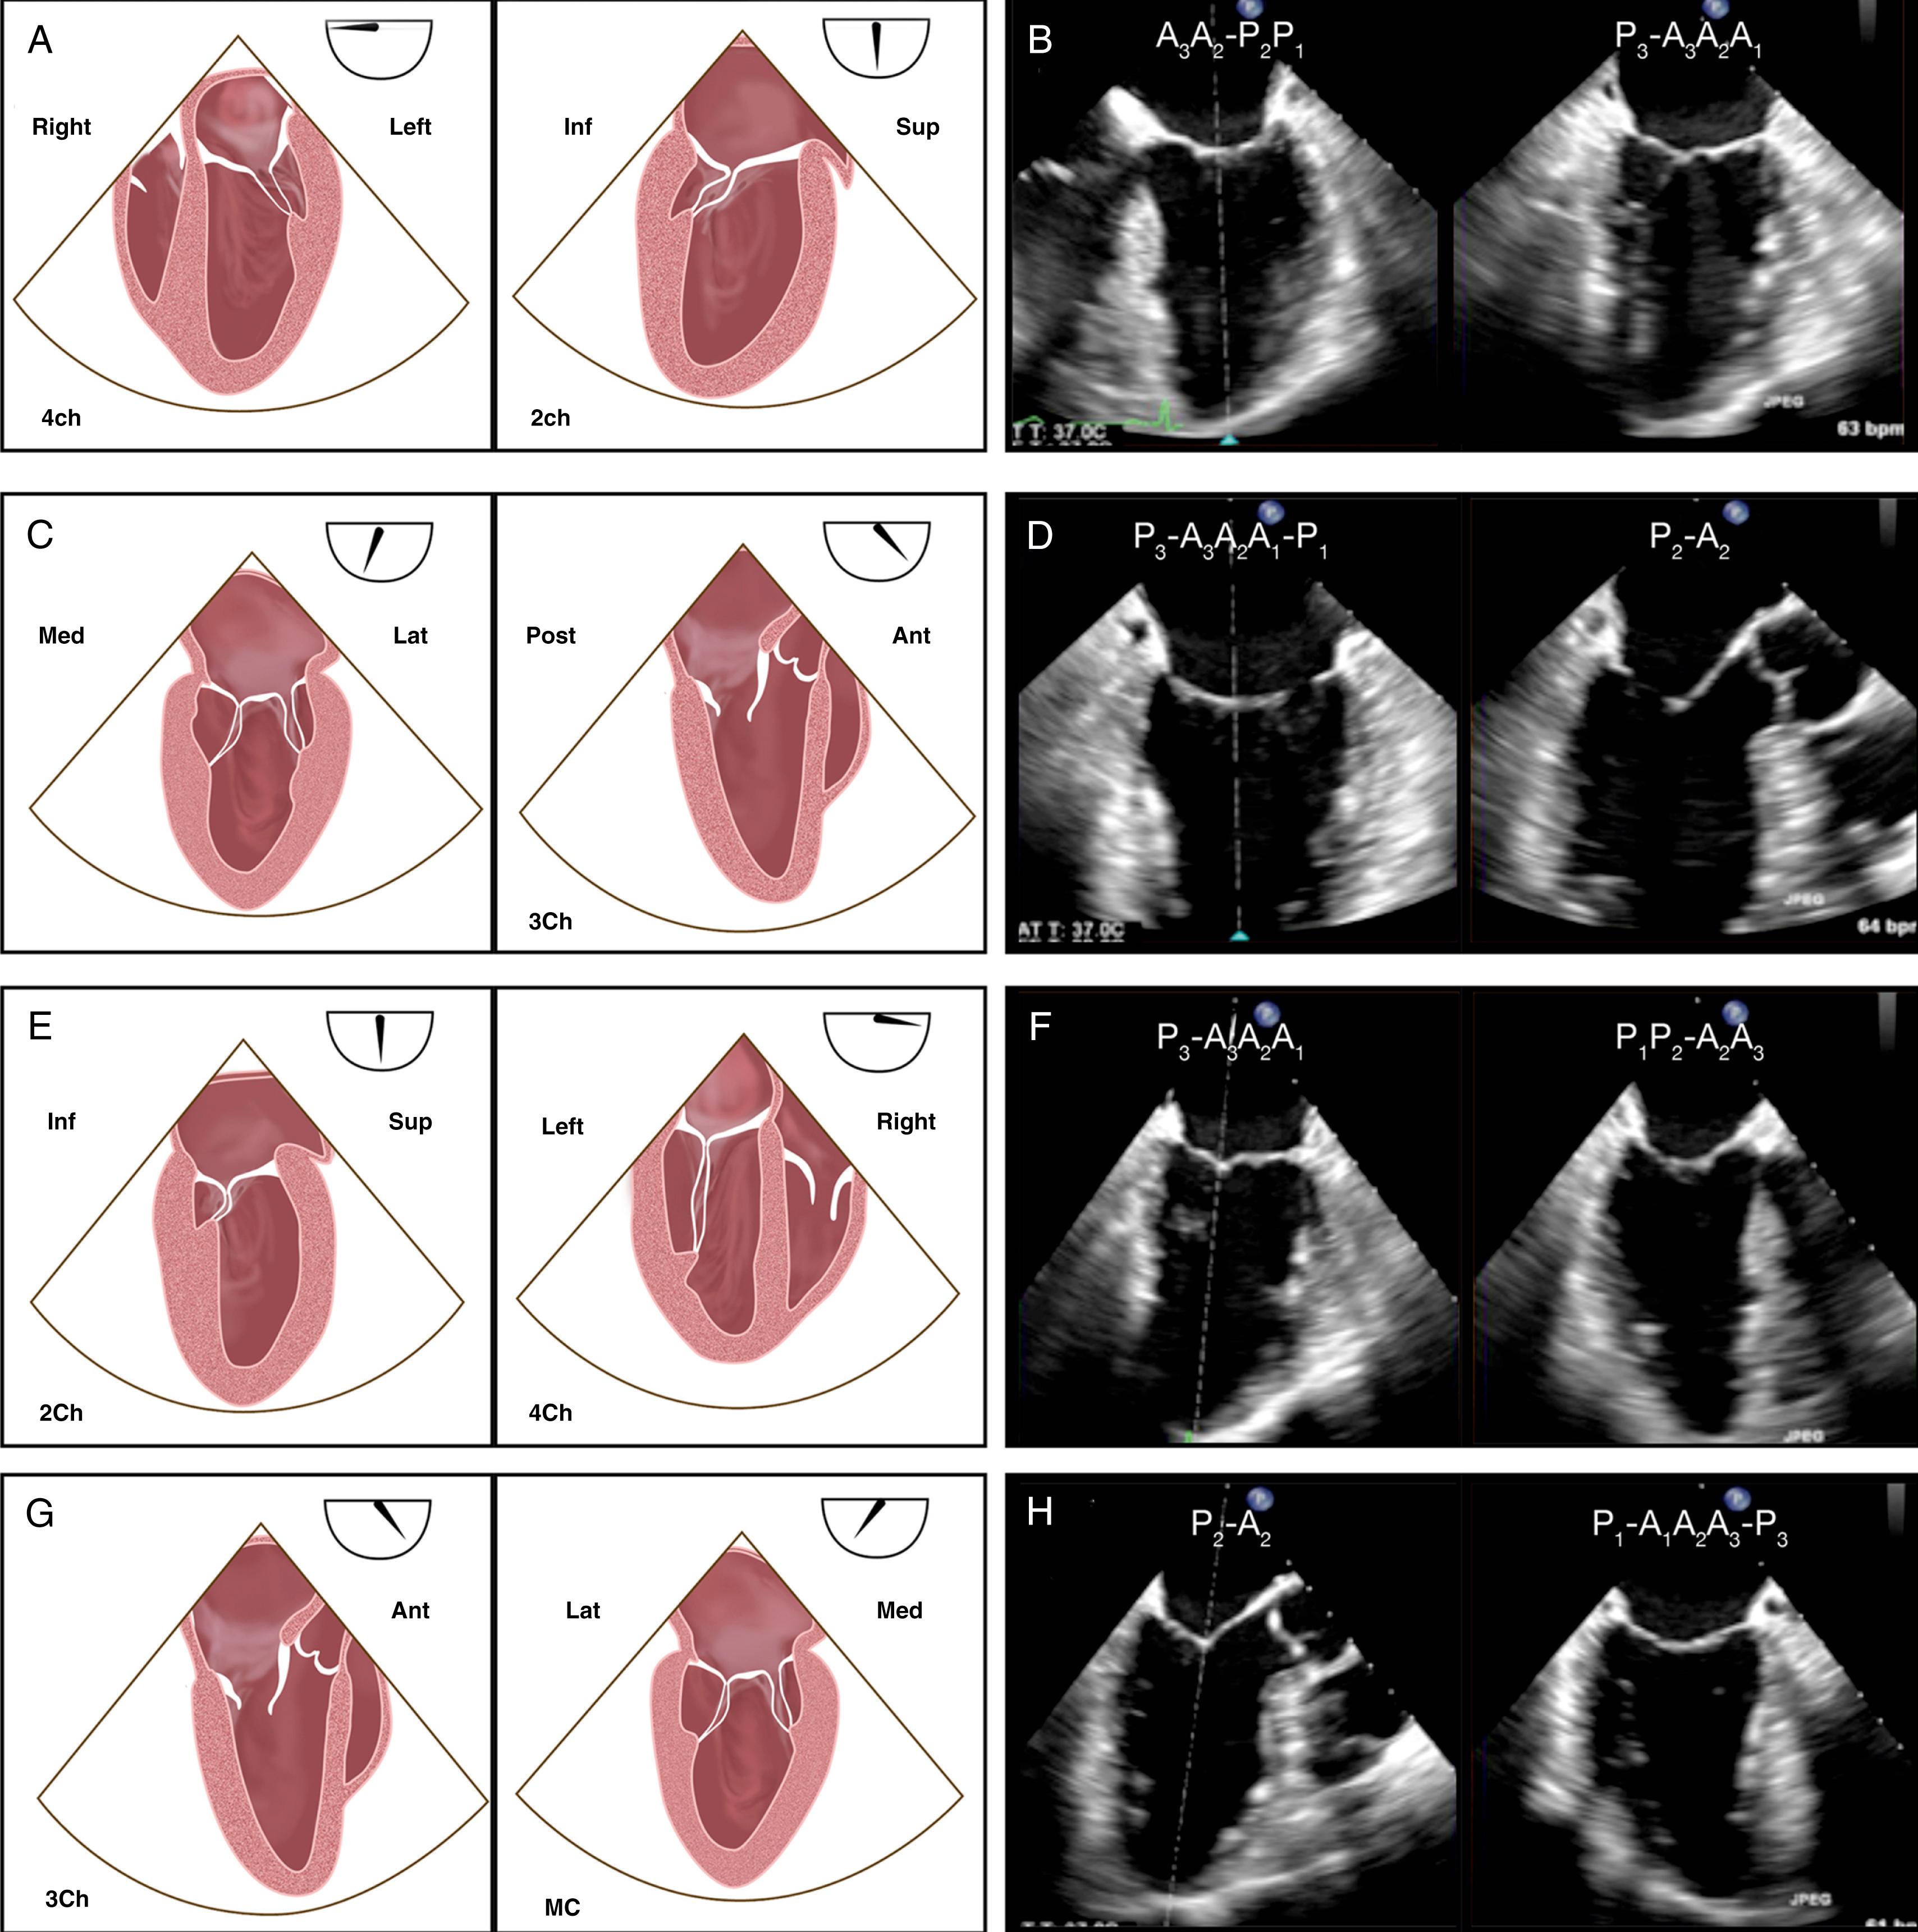 Figure 13.6, Simultaneous multiplane transesophageal echocardiographic image display. Simultaneous multiplane imaging permits the use of a dual screen to simultaneously display two real-time 2D images. In these examples, the primary image (on the left in each panel) is the reference view, with the second view (on the right in each panel) orthogonally rotated 90° to the primary view, but any tilt angle can be used for the secondary view. The typical 90° orthogonal second image is oriented as if the rotation has occurred in a clockwise manner and, for some views, appears ‘‘left-right reversed’’ compared with single-plane imaging. A, B, The primary view is the mid-esophageal (ME) four-chamber (4Ch) view. C, D, The primary view is the ME mitral commissural (MC) view. E, F, The primary view is the ME two-chamber (2Ch) view. G, H, The primary view is the ME LAX view. A, anterior; Ant, anterior; Inf, inferior; Lat, lateral; MC, mitral commissural; Med, medial; P, posterior; Sup, superior.